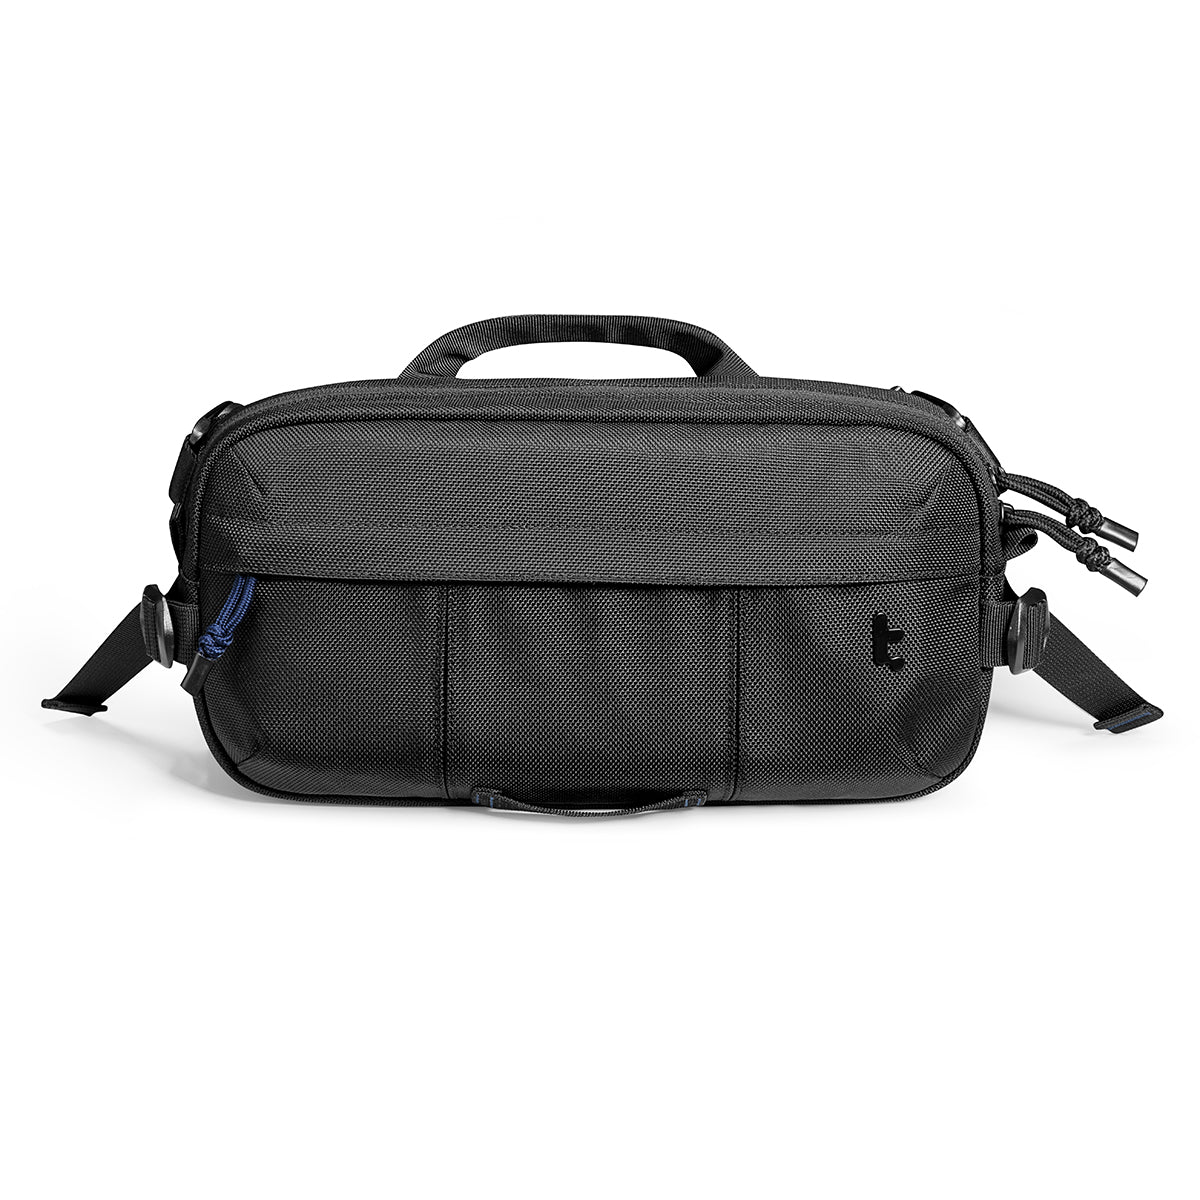 Tomtoc Wander-T26 Daily Sling Bag